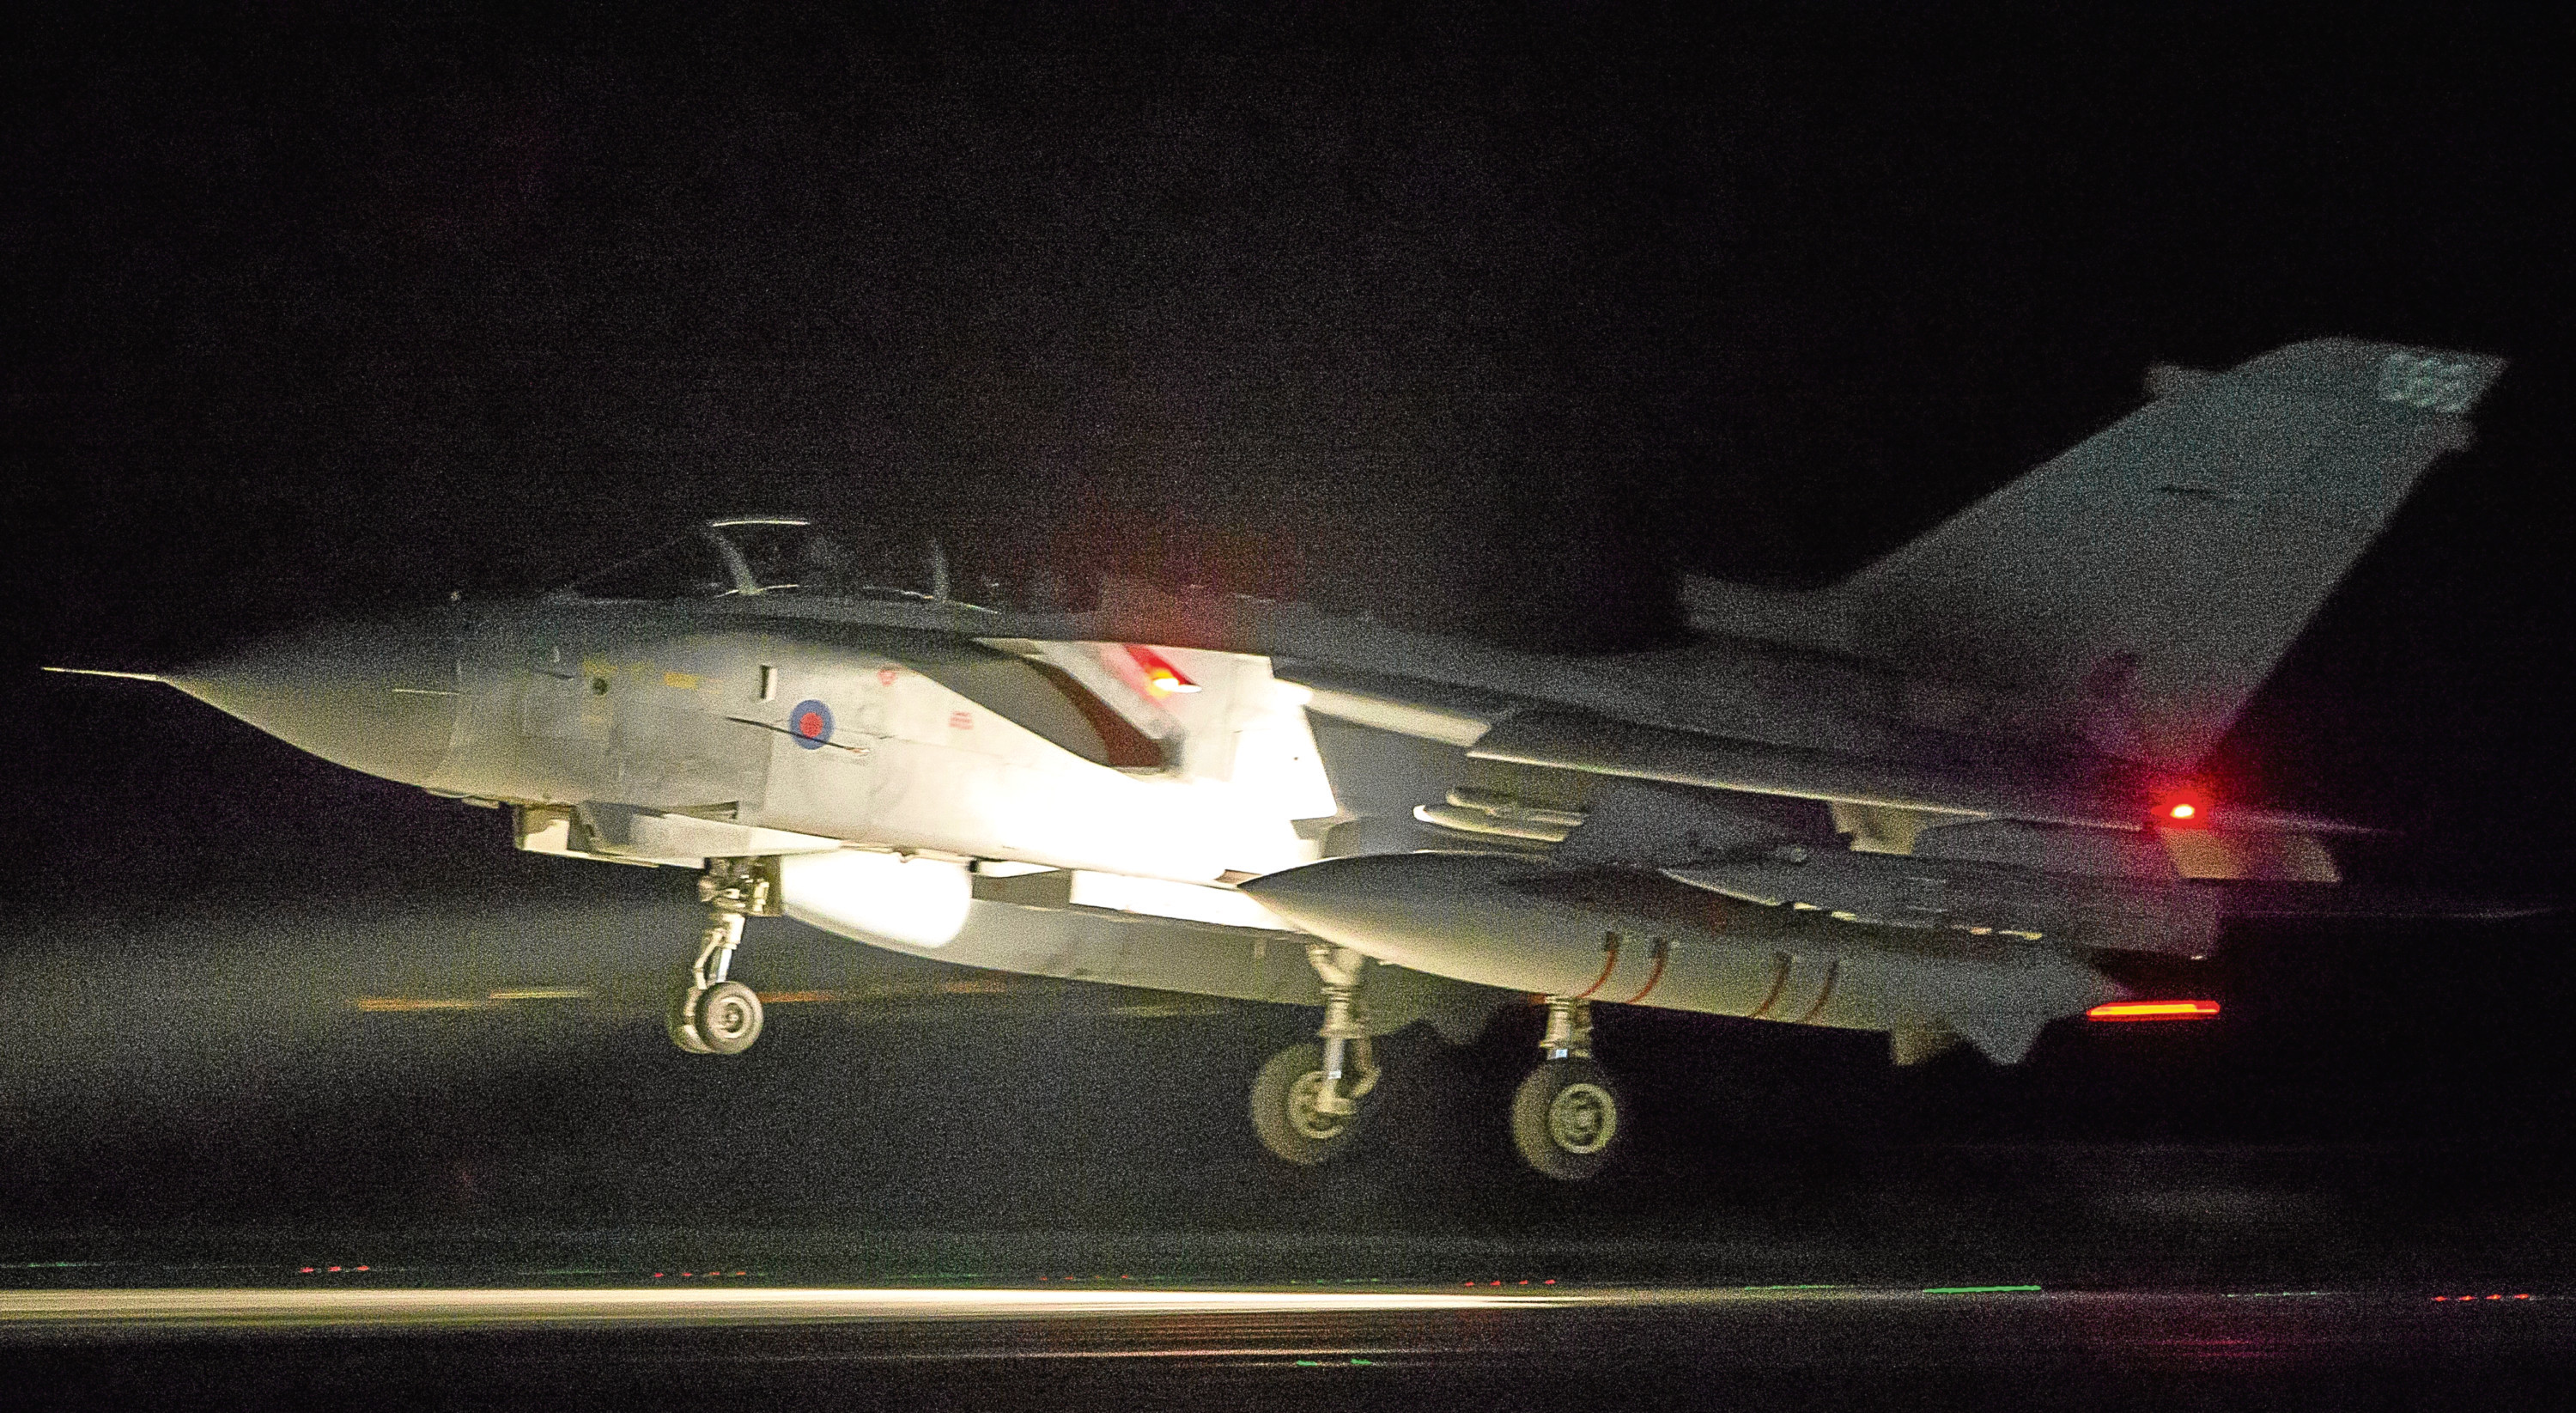 An RAF Tornado comes into land at RAF Akrotiri after concluding its bombing mission in Syria.